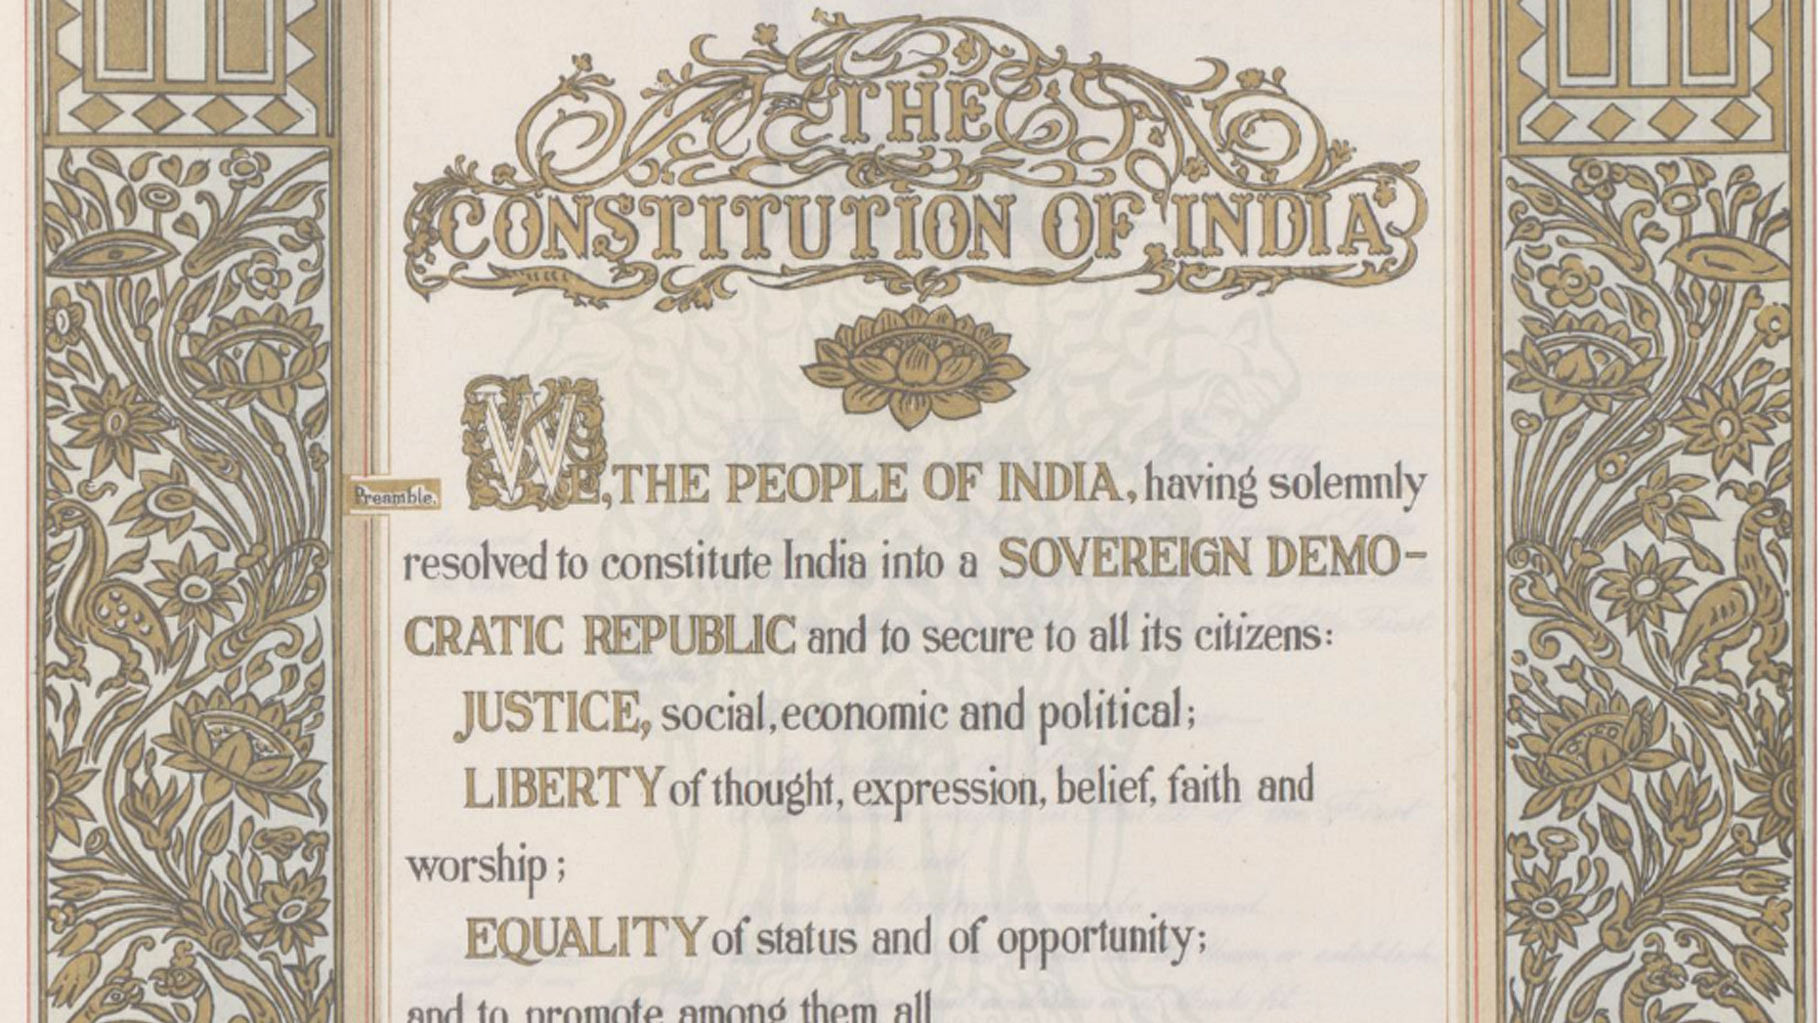 The Indian Constitution is a beautiful hand-written document. (Photo: Twitter/<a href="https://twitter.com/ainvvy">@ainvvy)</a>